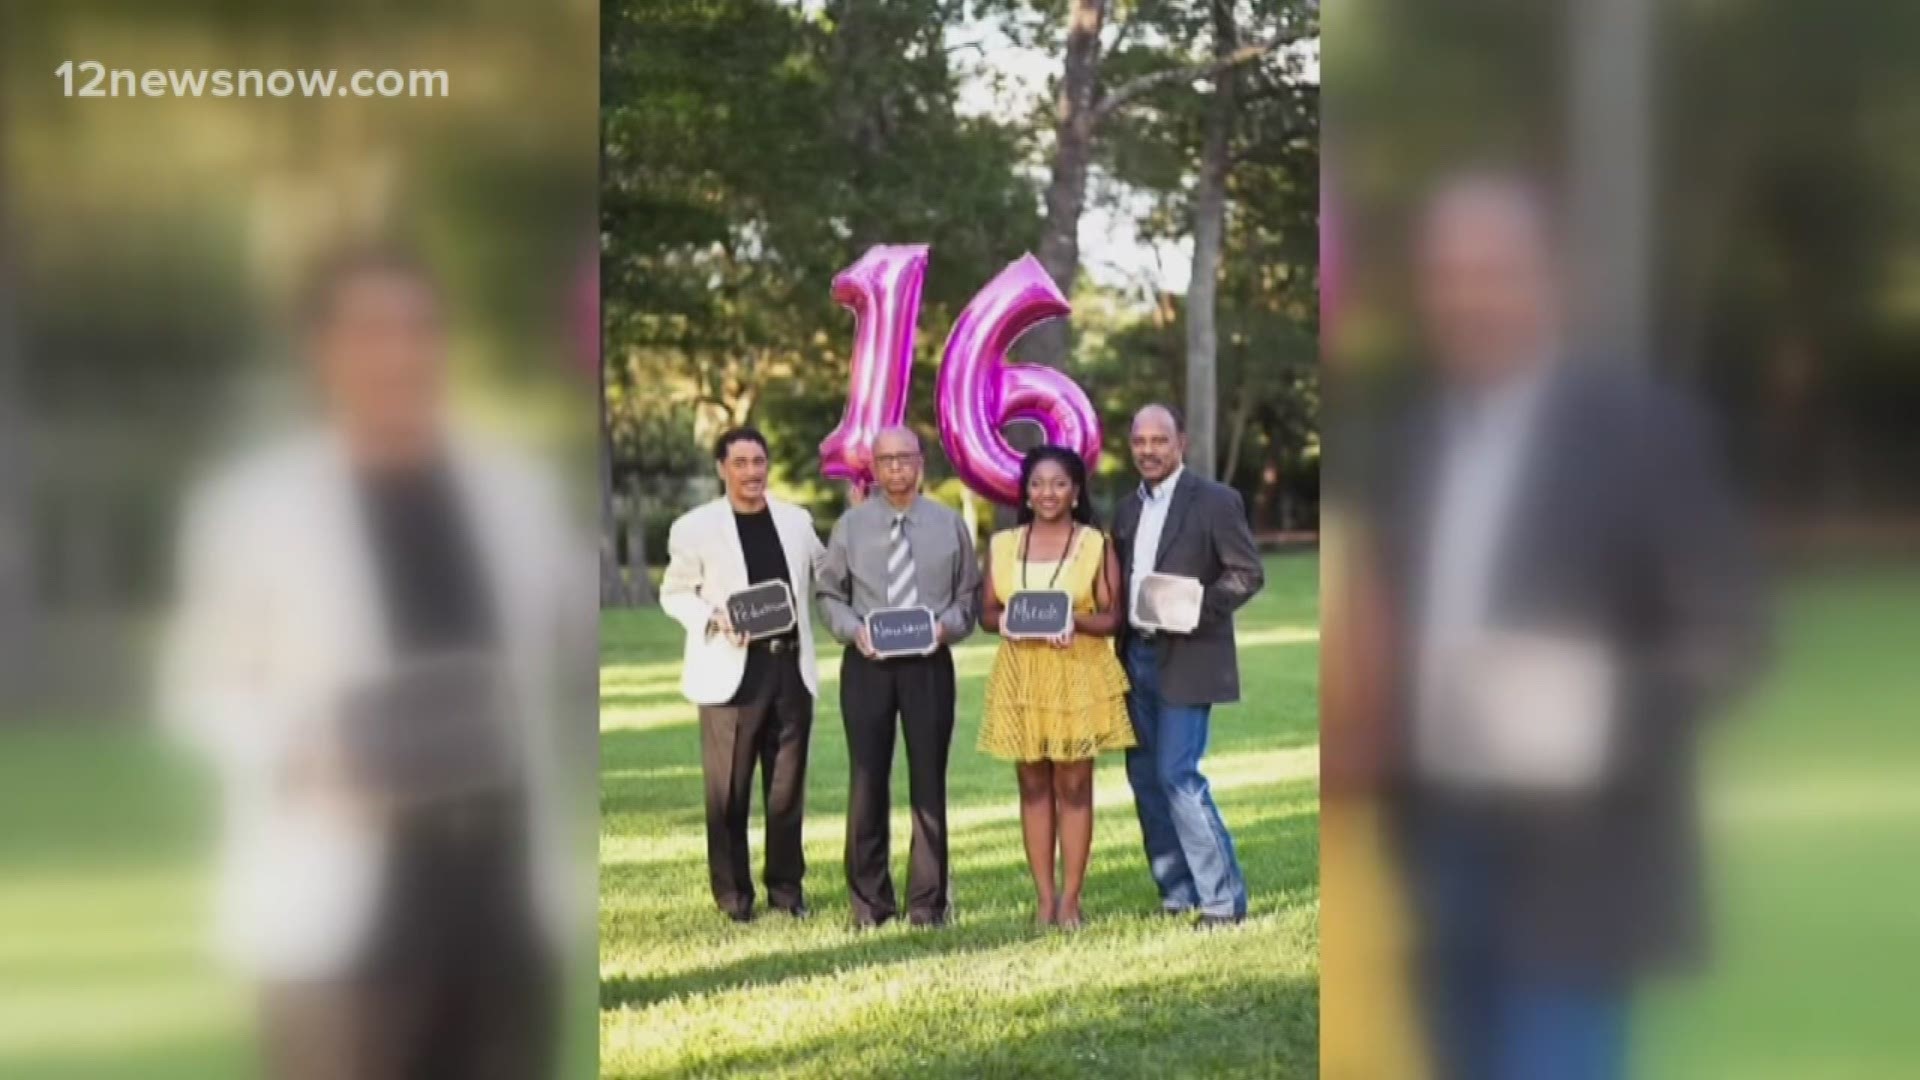 The Houston-area teen wanted to honor the doctors  who helped save her life.